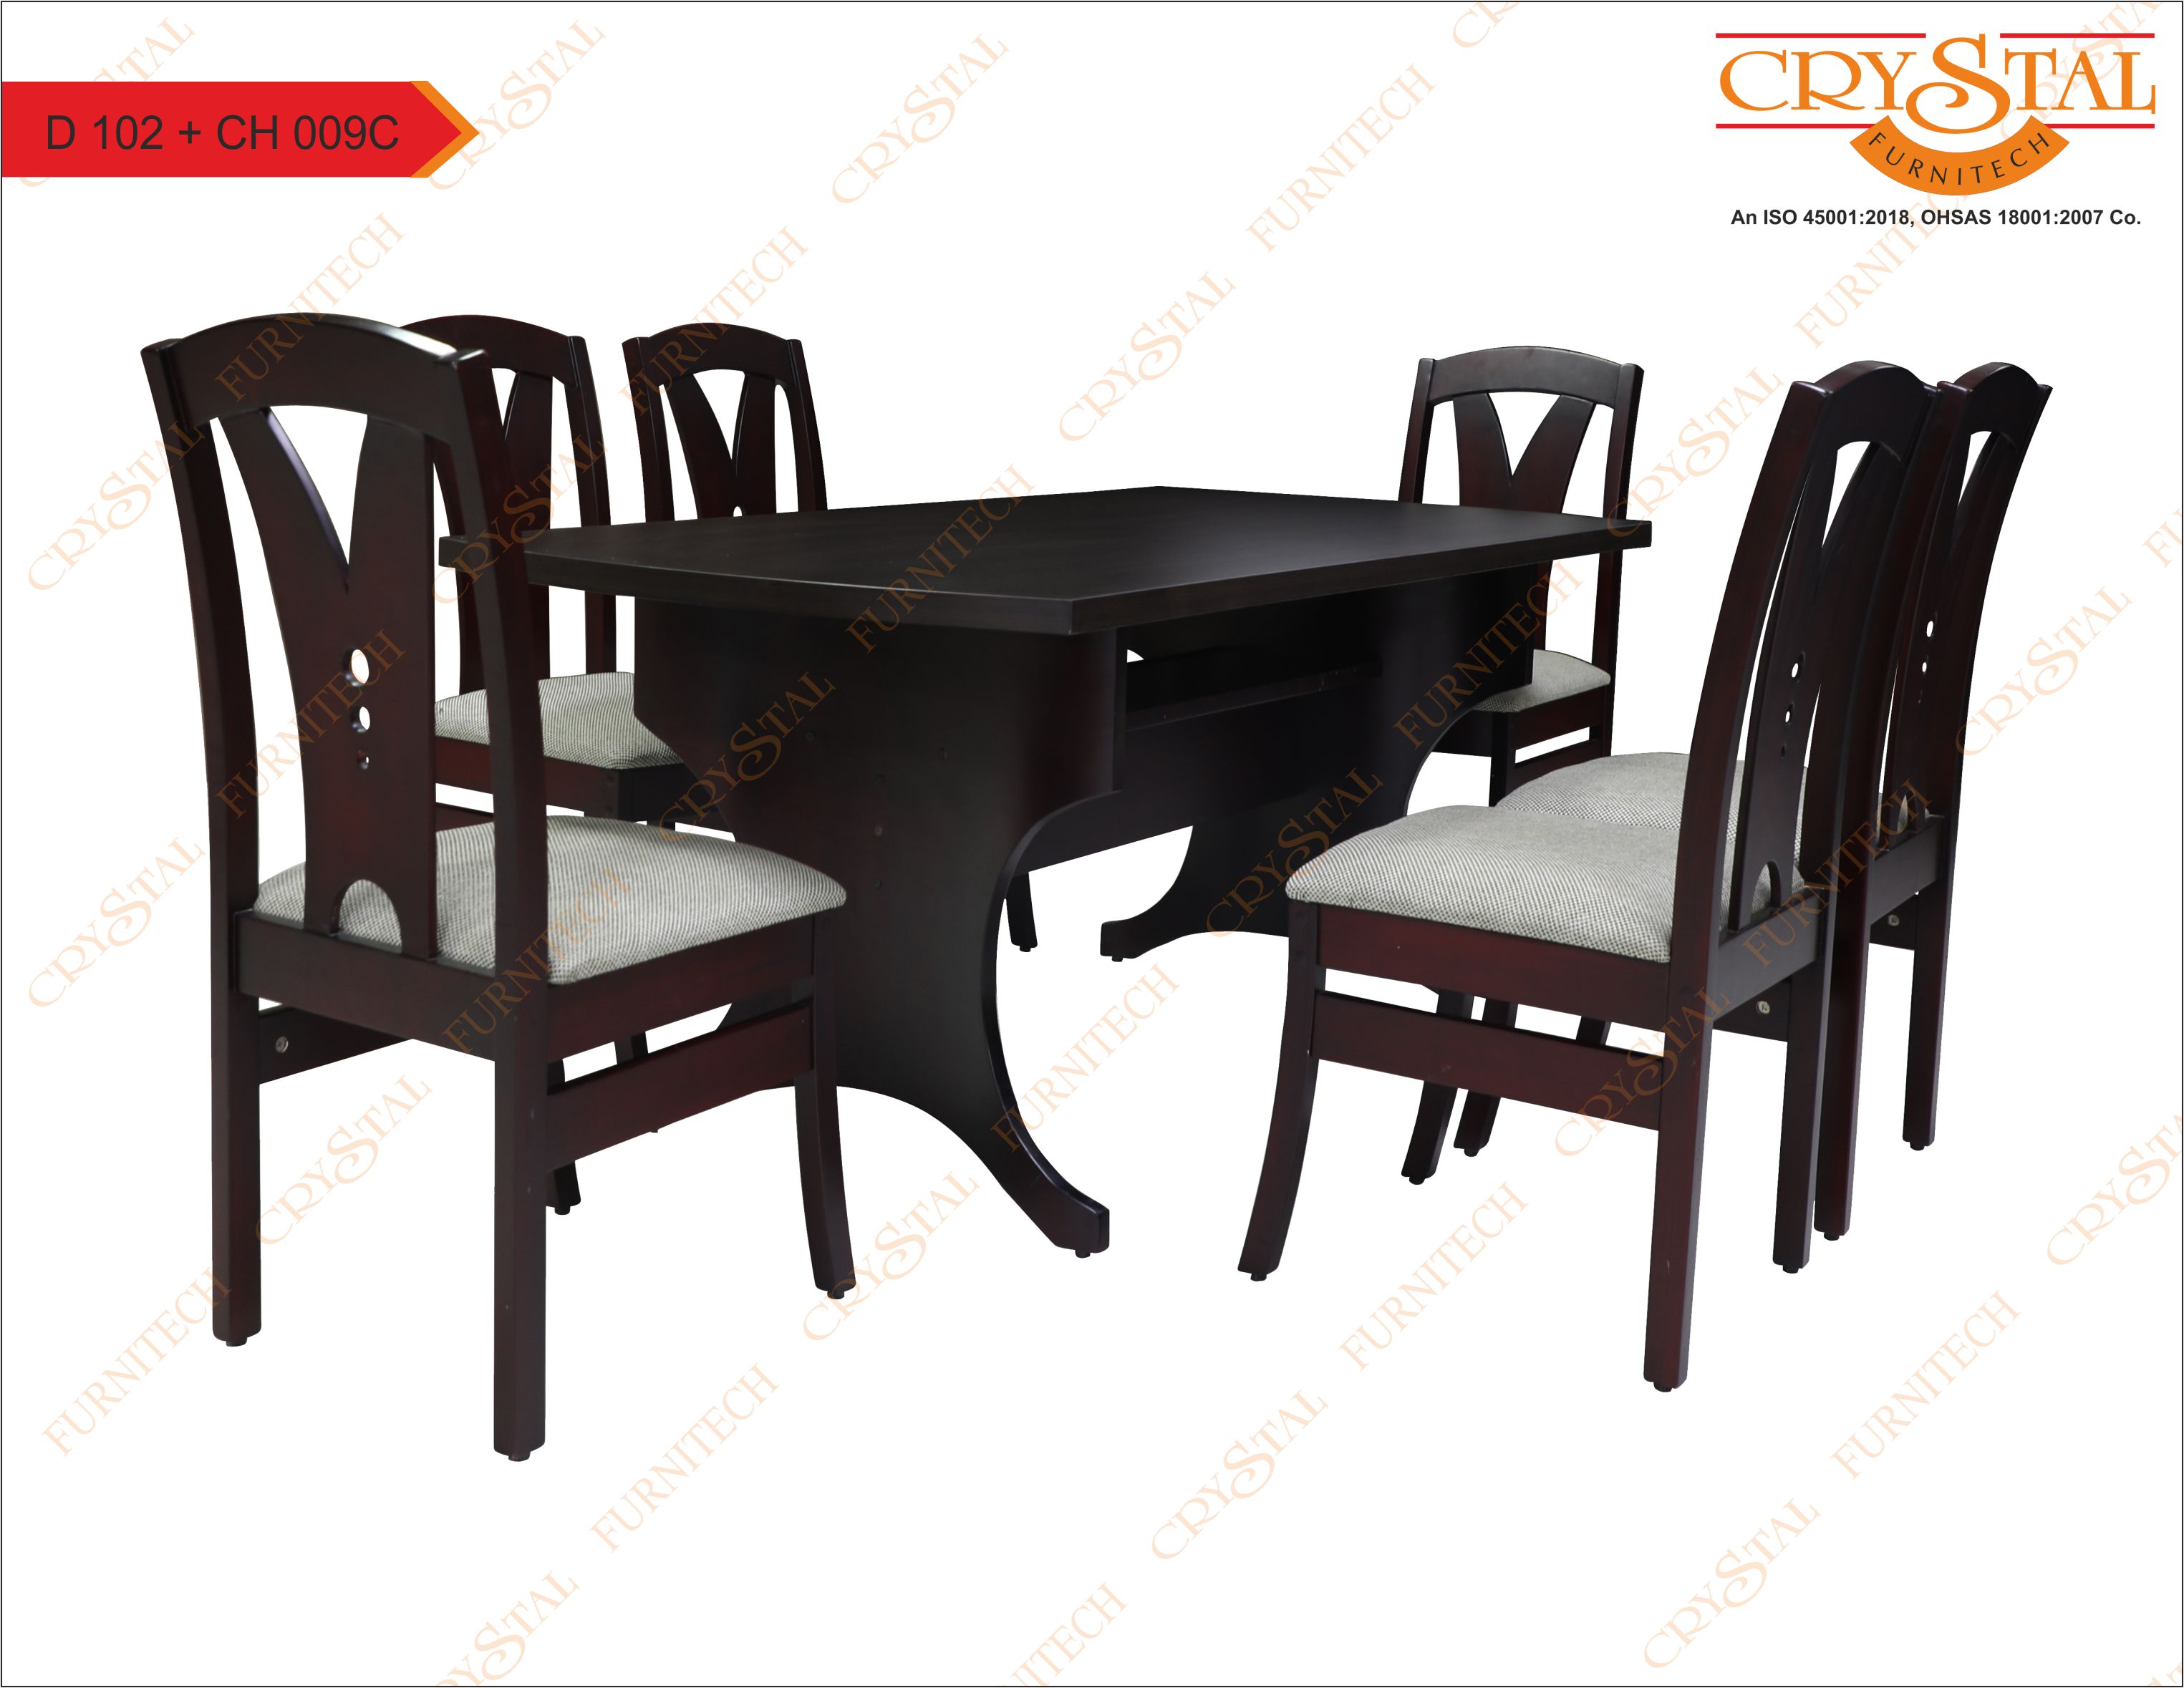 images/products/Dining-Set-Dining-Set-D-102+CH009C_1657002460.jpg